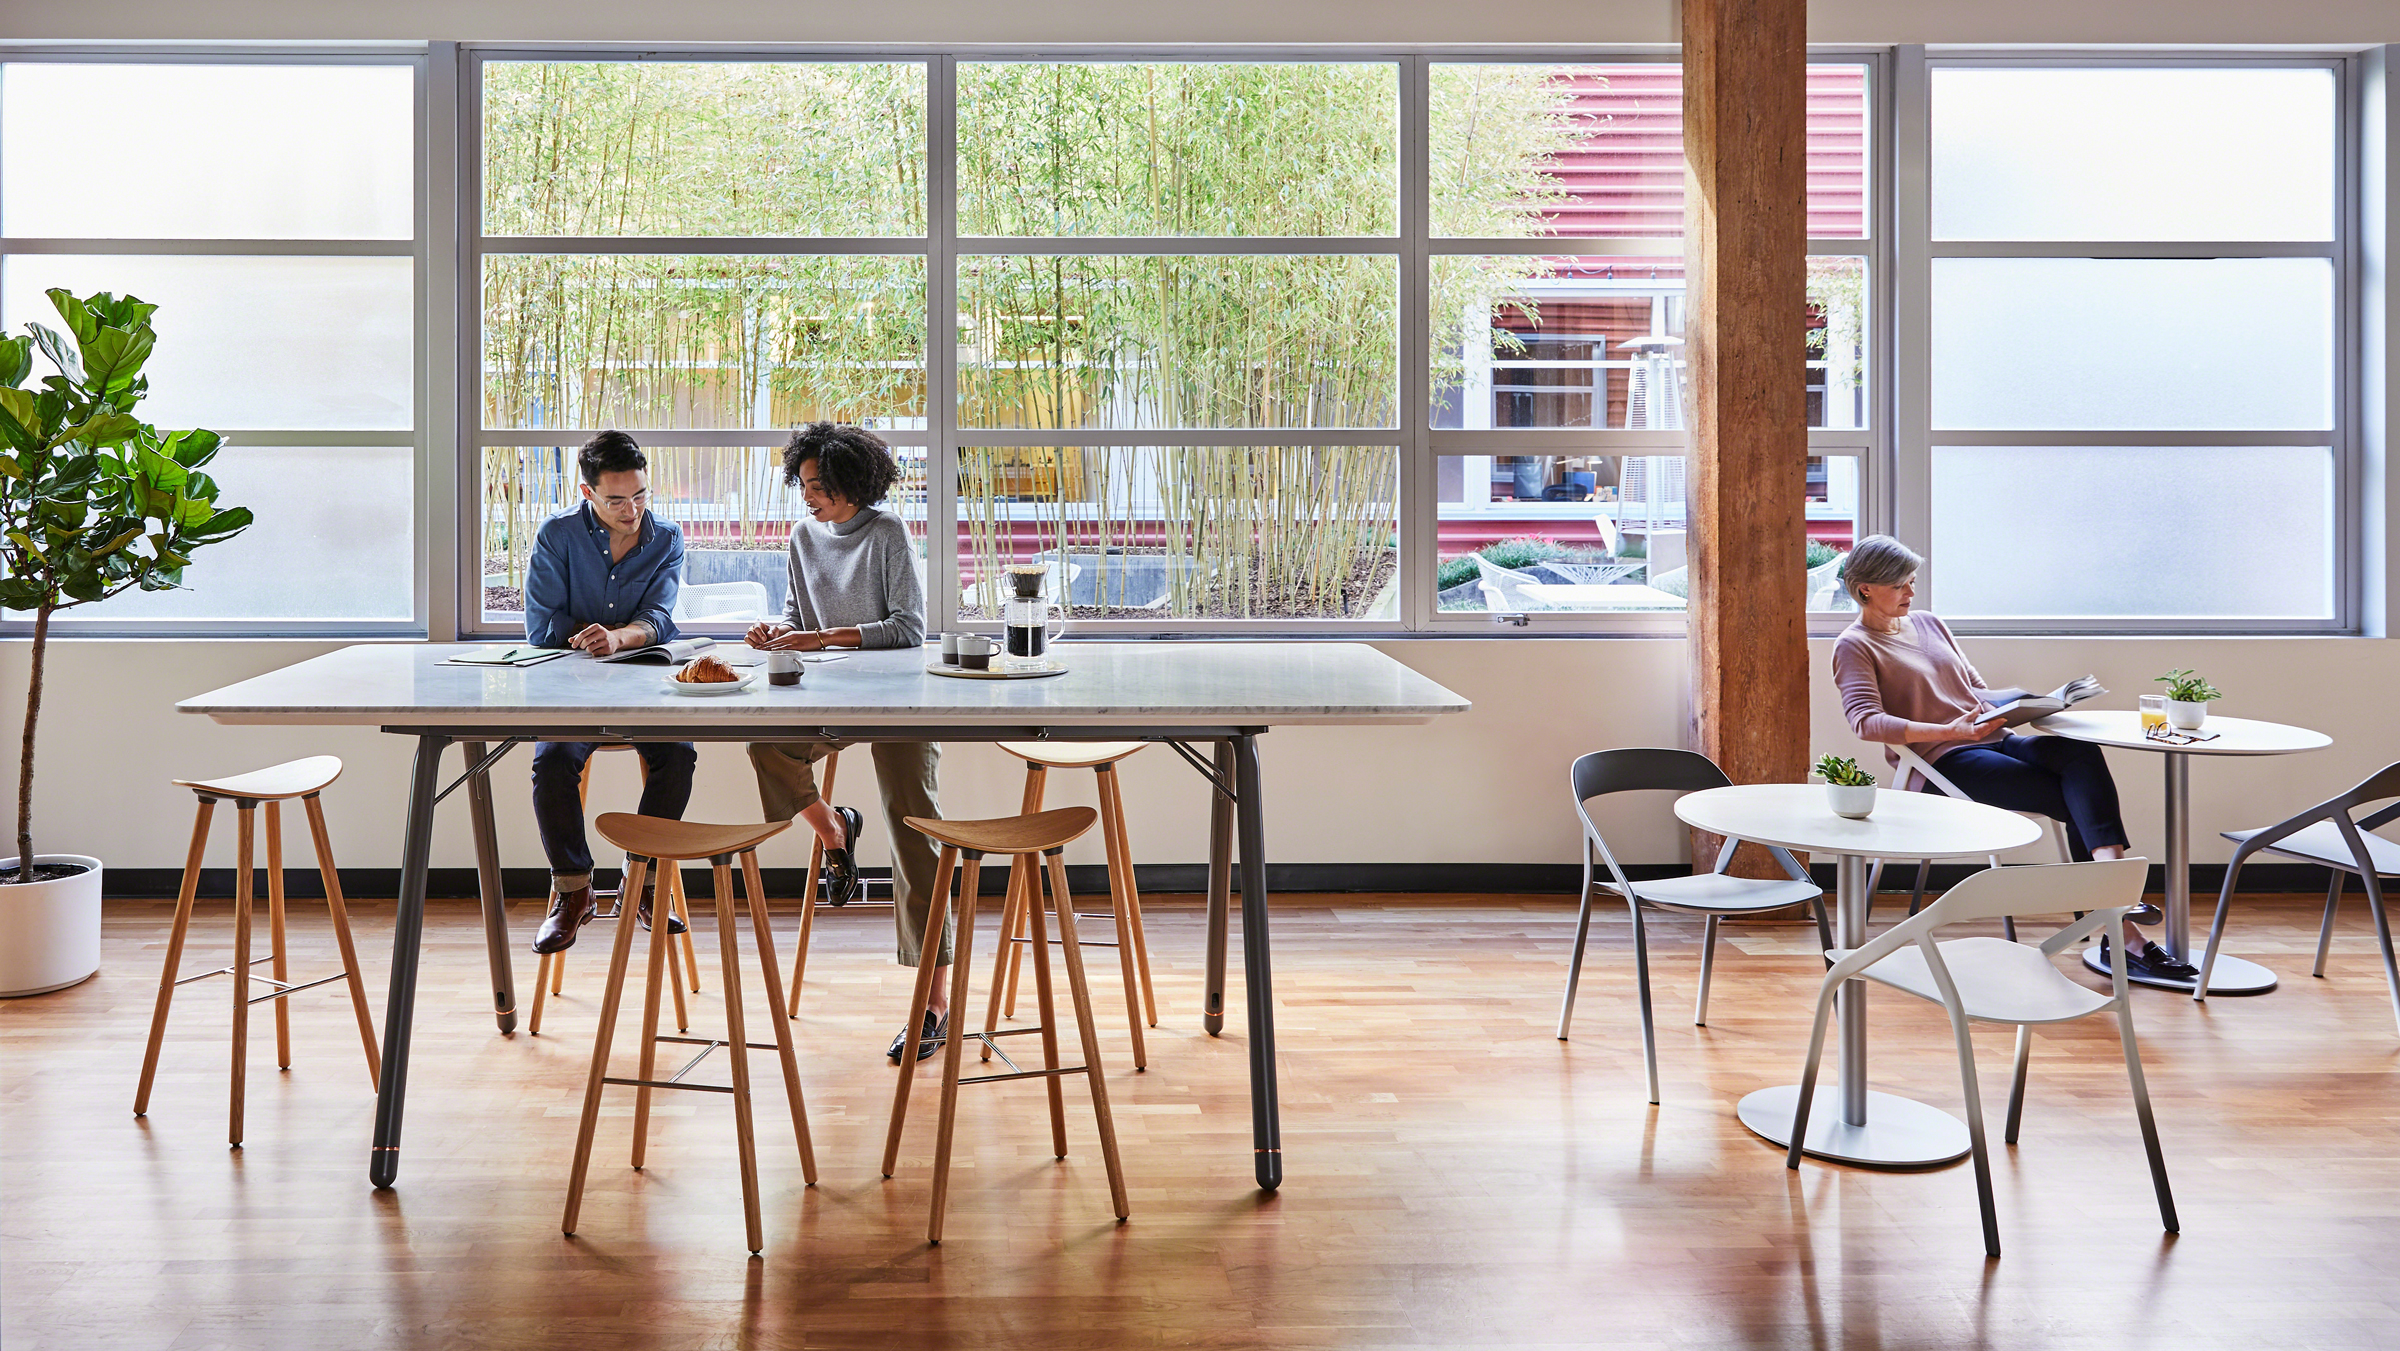 Two team members collaborate in cafe meeting space at standing-height table and wood stools